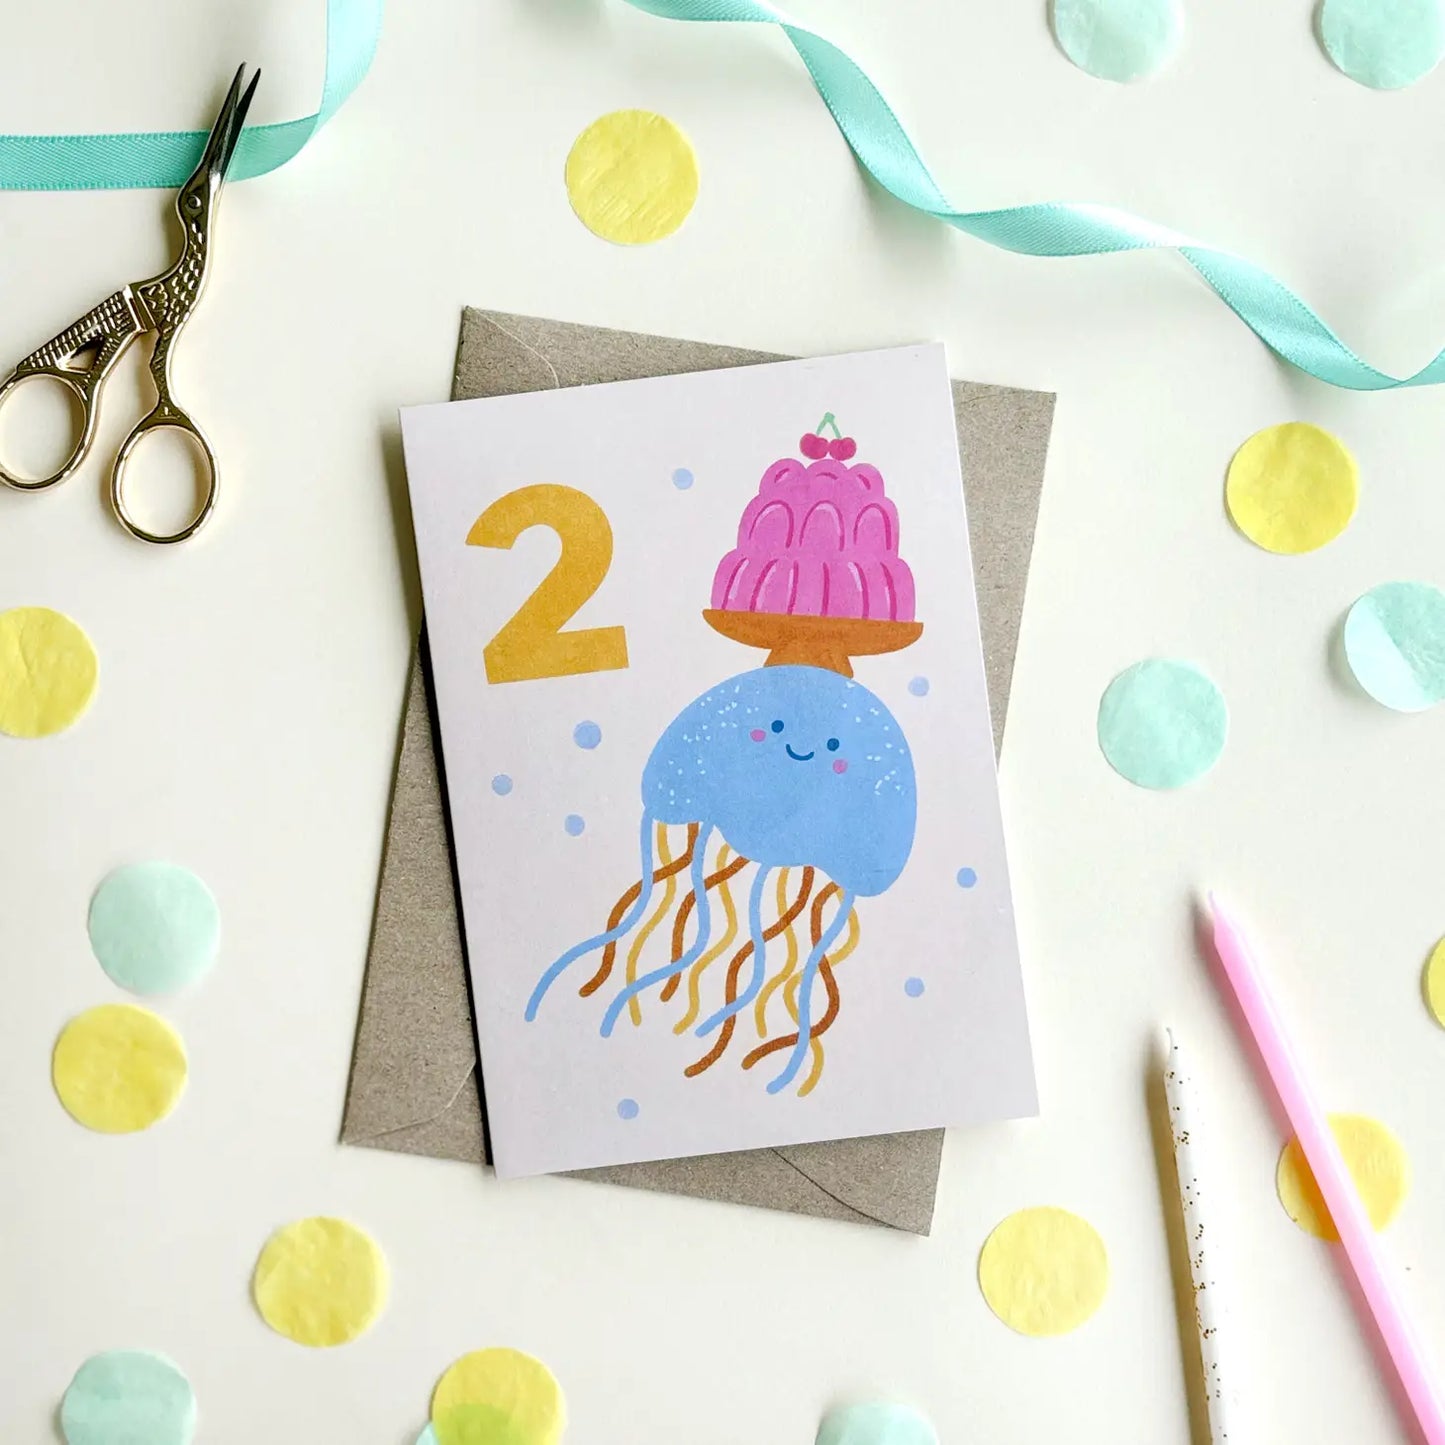 TWO Jellyfish Bday Card